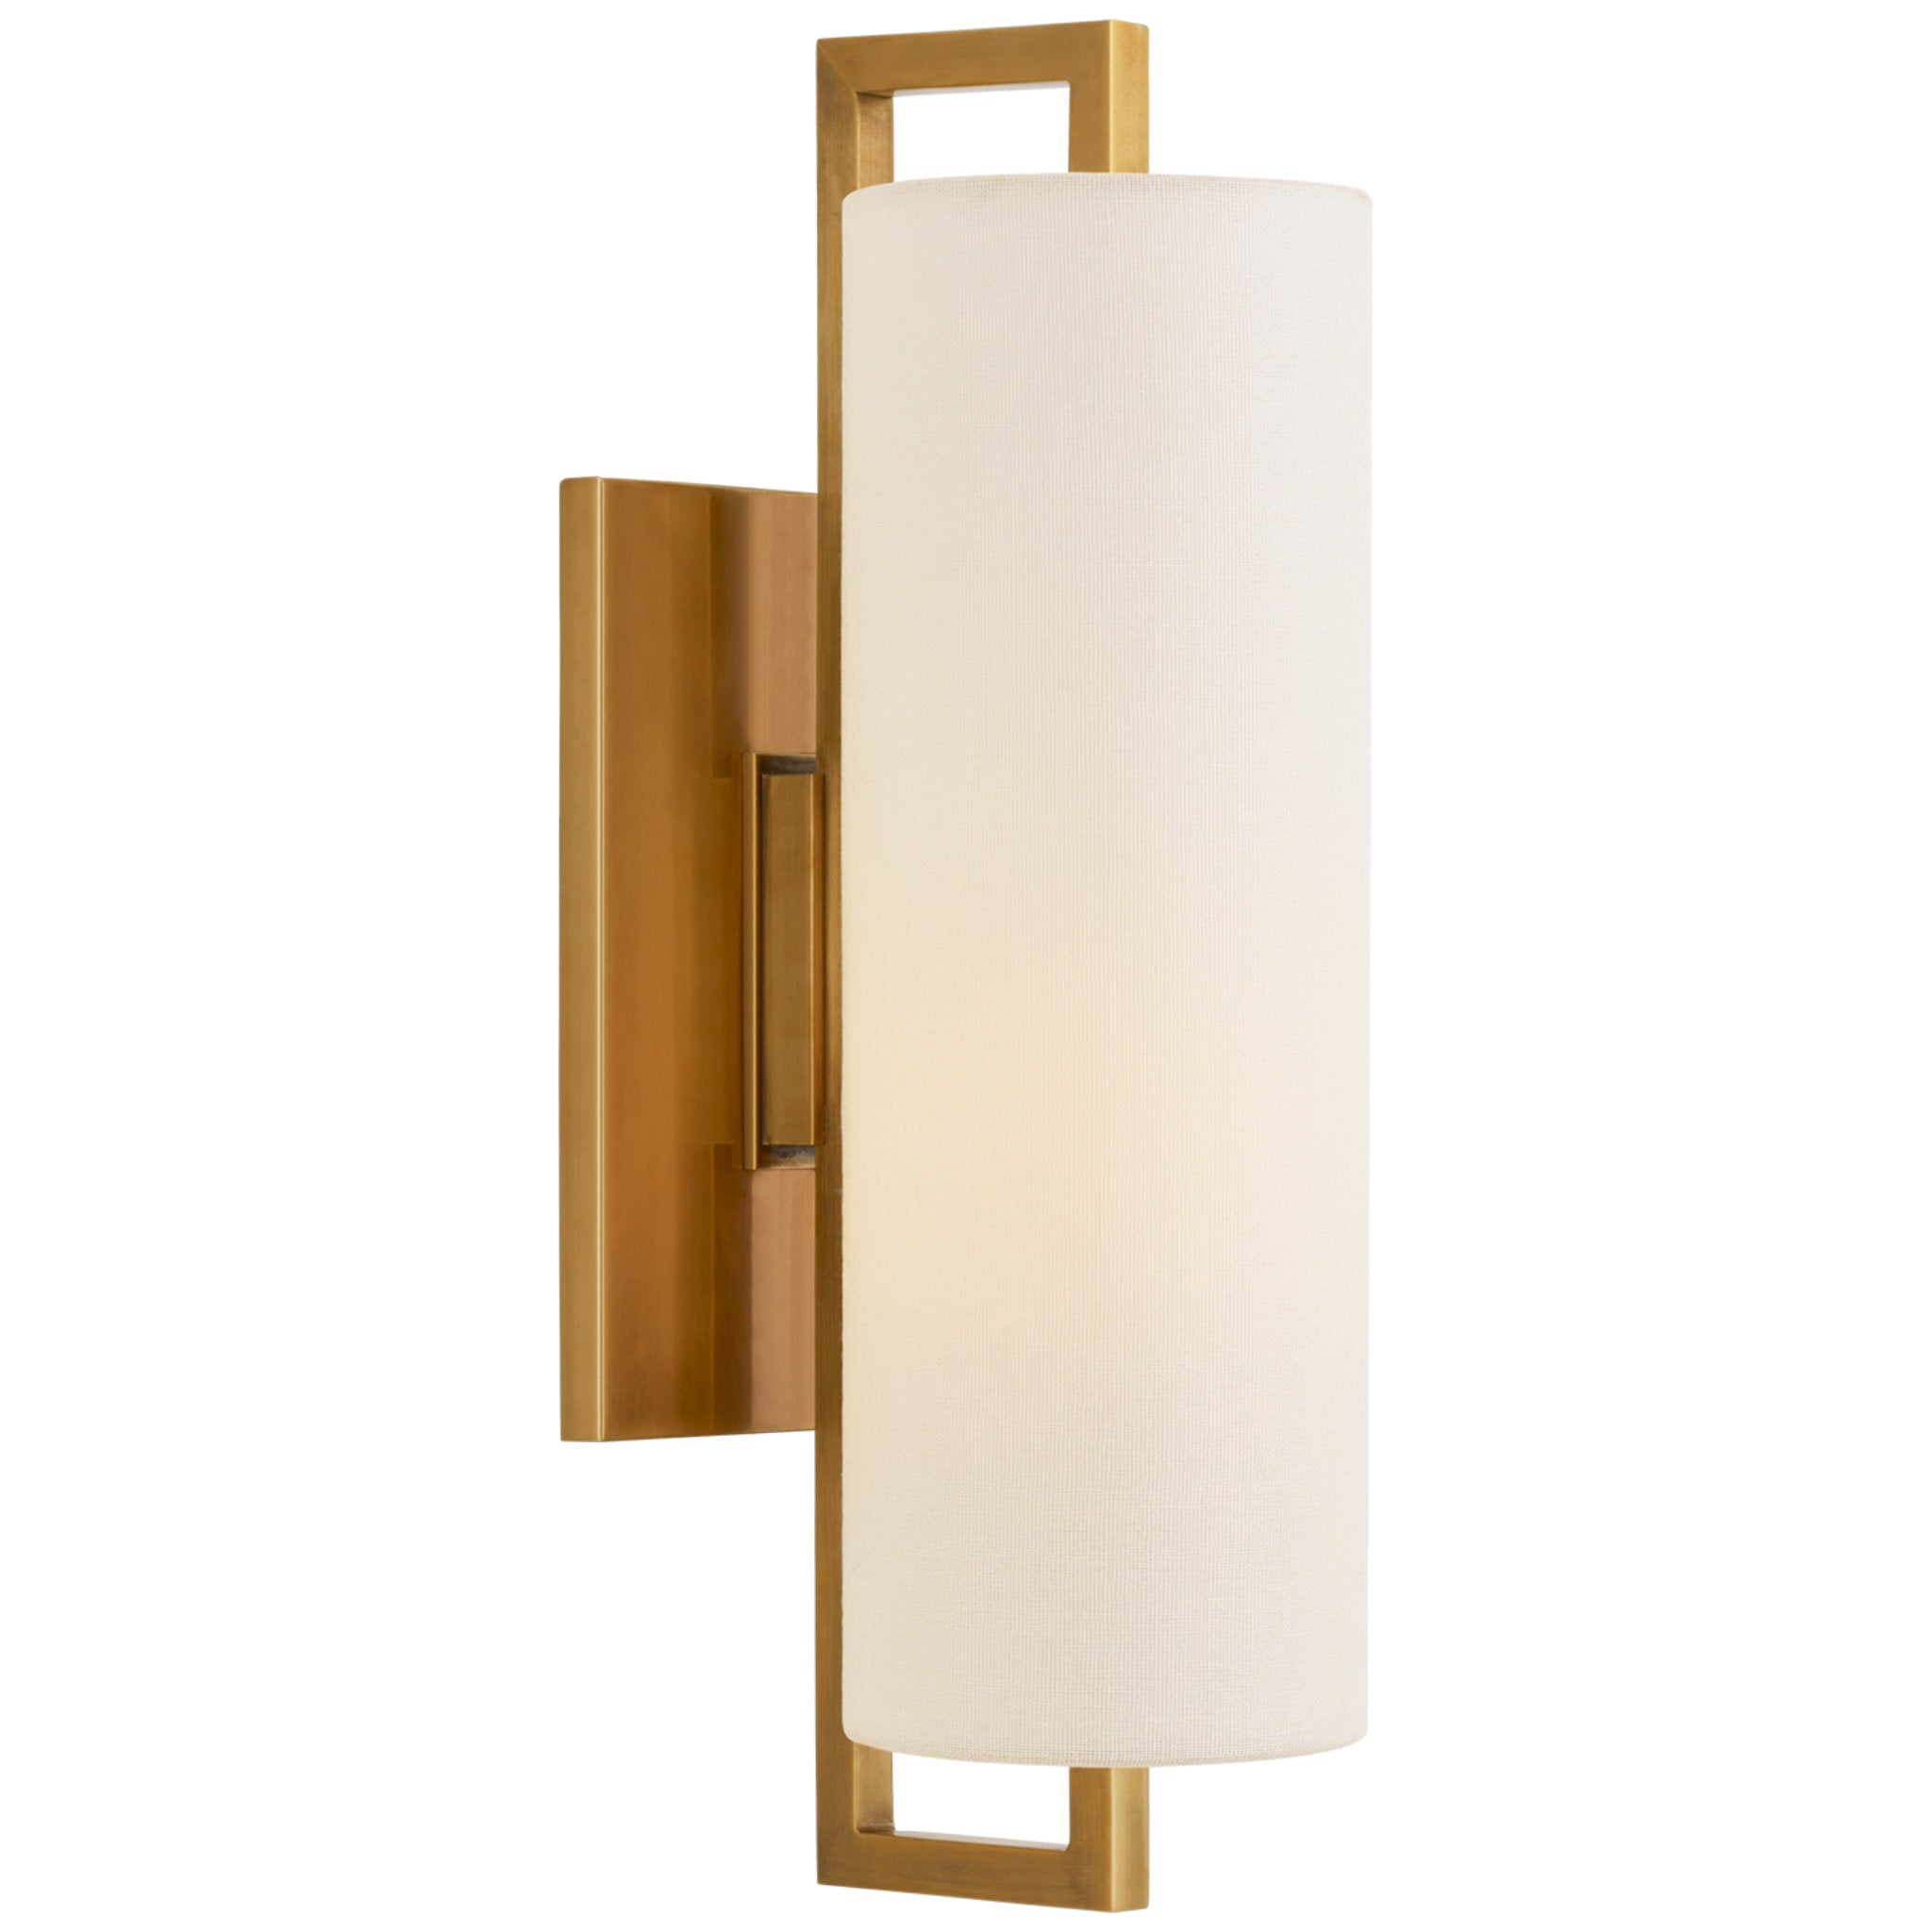 Ian K. Fowler Bowen Medium Sconce in Hand-Rubbed Antique Brass with Linen Shade